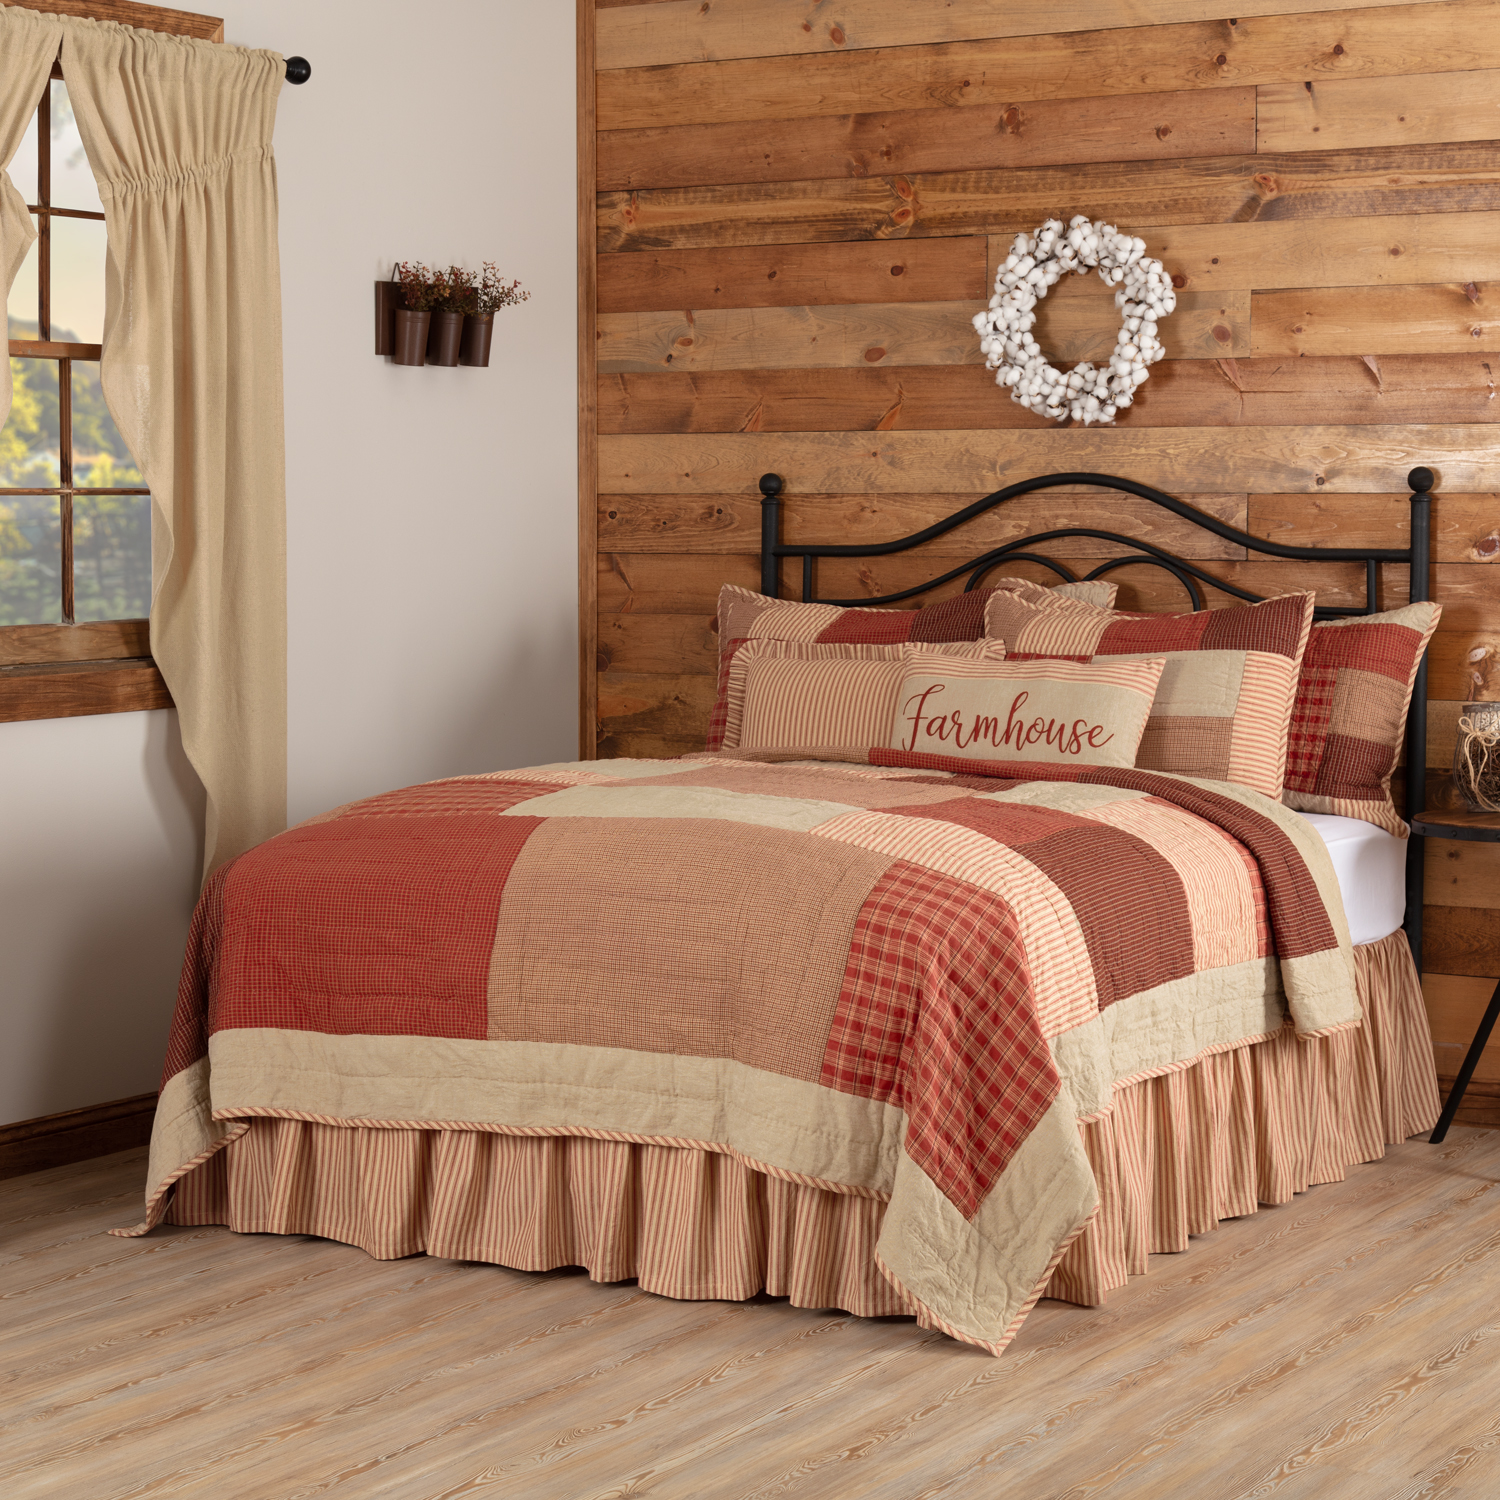 California King Quilt 130wx115l Bedding, Red California King Bedding